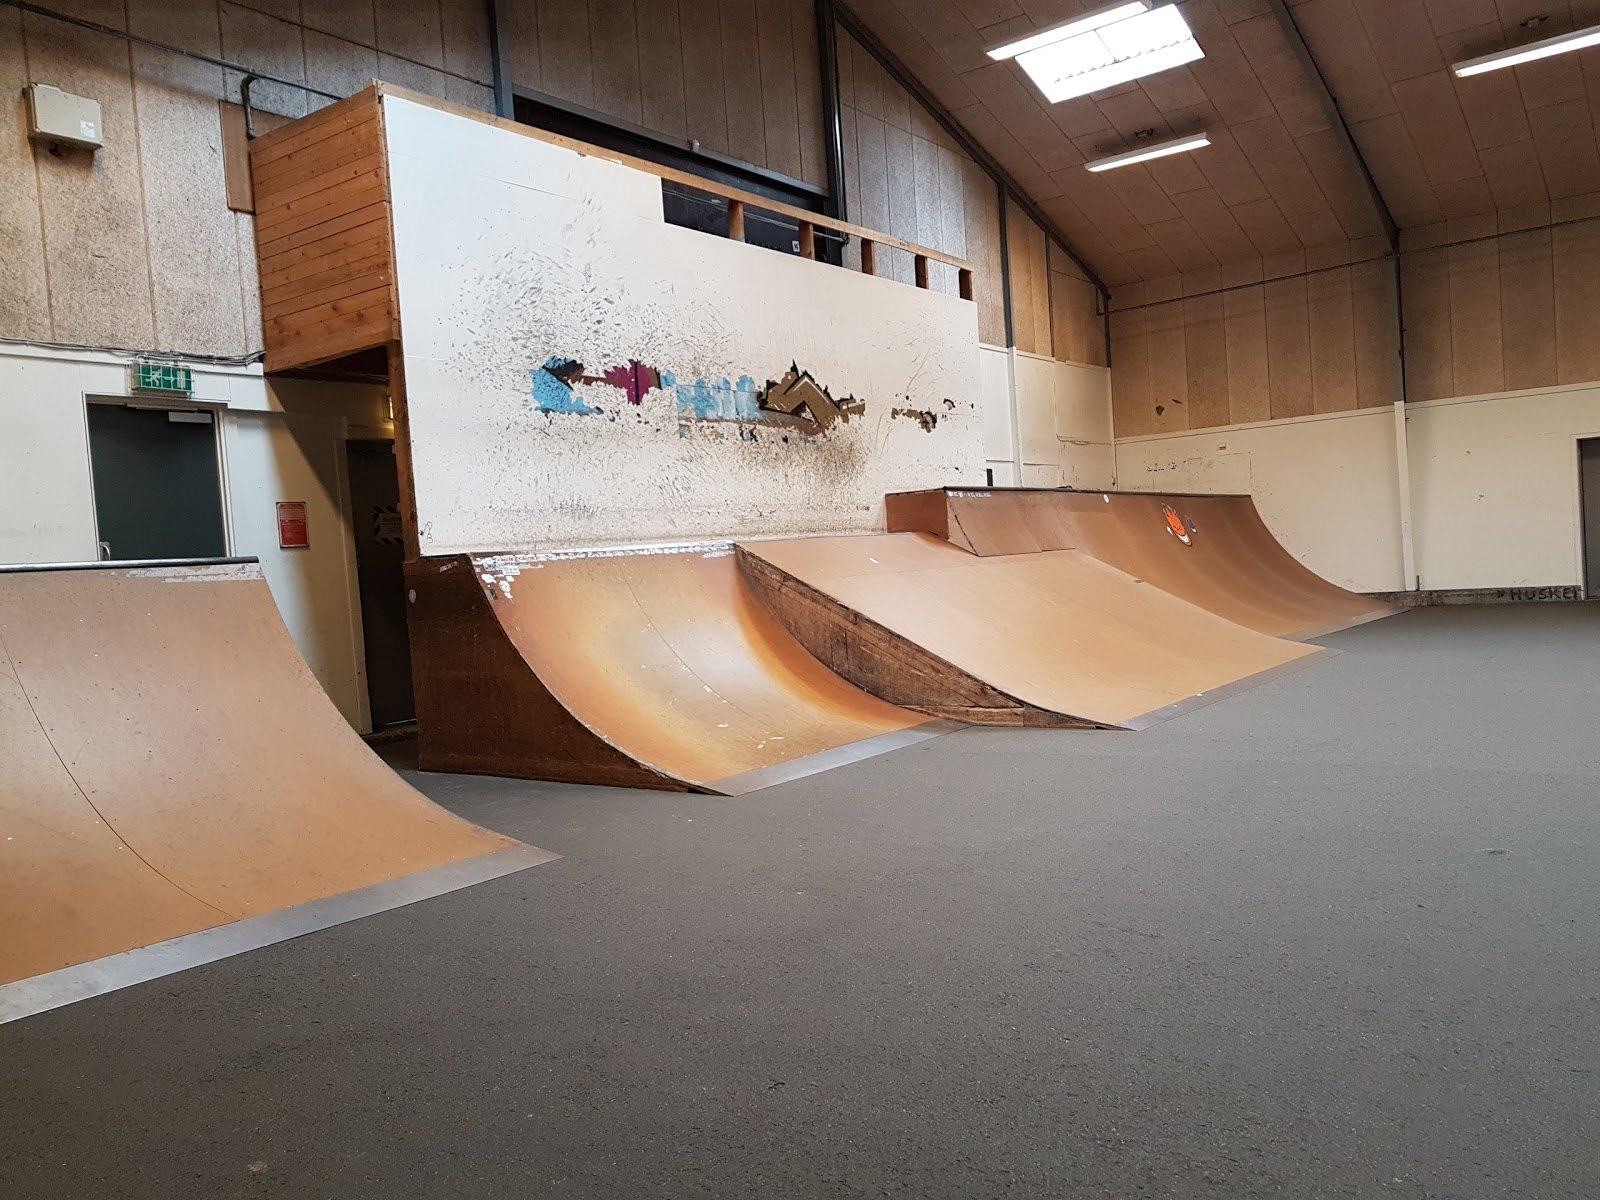 Vejgaard skatepark is partly a traditional indoor skatepark. It has everything one could expect of a traditional skatepark such as quarter pipes or banks in both ends of the park and many pyramids and grind boxes. Even though we use the word, traditional, it does not mean boring. On the contrary, Vejgaard skatepark is built in a way that lets the skaters gain great speed and a good flow throughout the park. It is also important to point out that the park is in a good condition and has elements of wood which can be moved around. This means that you can build your own lines through the park. Vejgaard Skatehal also has an outdoor area with skating facilities. Vejgaards skatepark’s opening hours can be found on this website: http://www.ungaalborg.dk/index.php/artikler/item/46-skatehallen-i-vejgaardPlease notice that the opening hours may vary according to the season.It is possible to become a member of Vejgaard skatepark by paying a quarterly membership fee. The price depends on your age. You can find more information here: http://www.ungaalborg.dk/index.php/artikler/item/46-skatehallen-i-vejgaardEvery year, the skatepark is home of a rollerblading competition called Camp42.